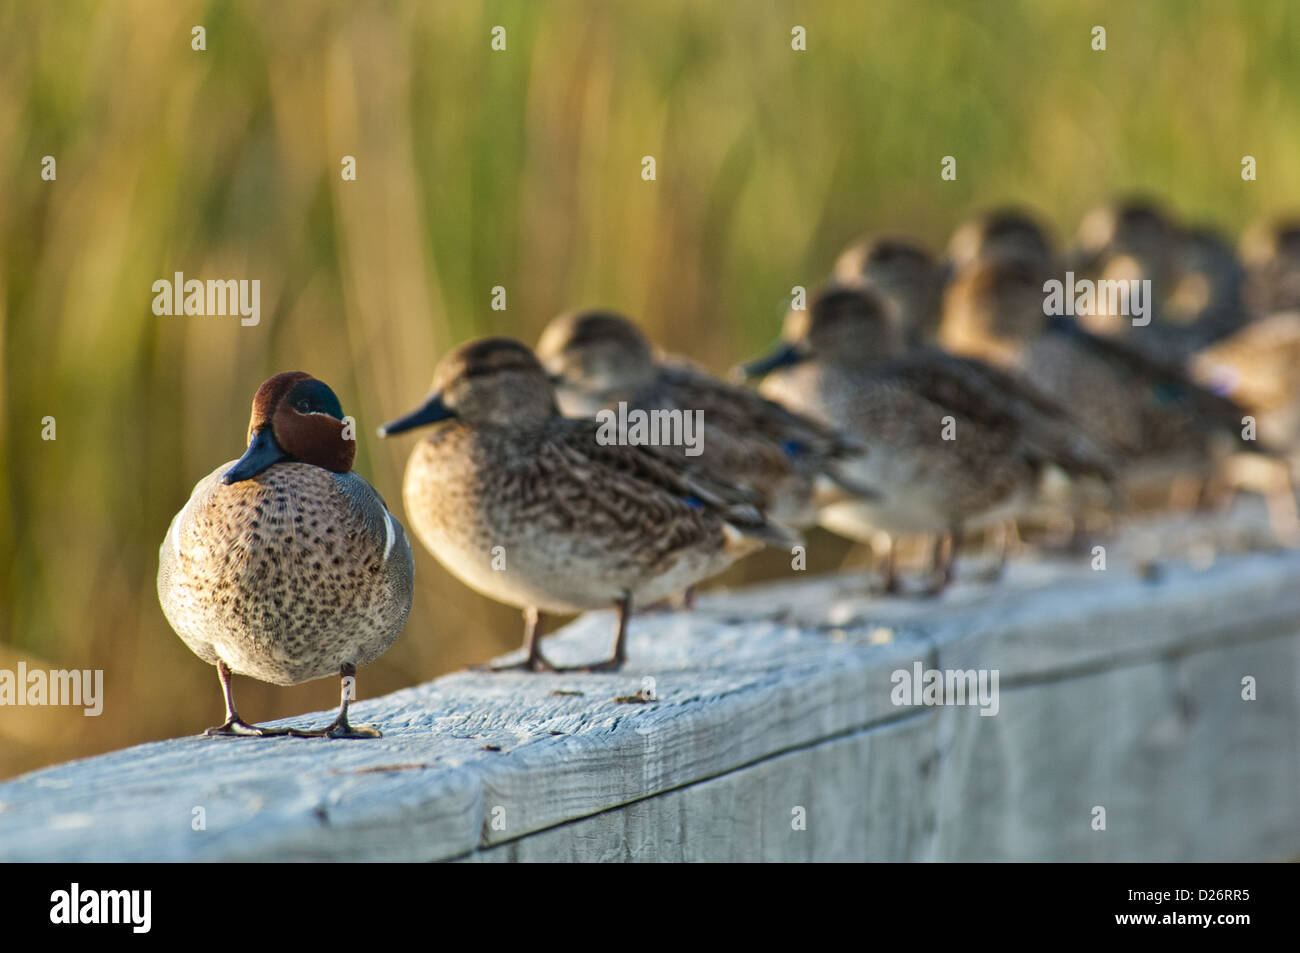 Drake Green-winged Teal (Anas carolinensis) duck with hens perched on a dock Stock Photo